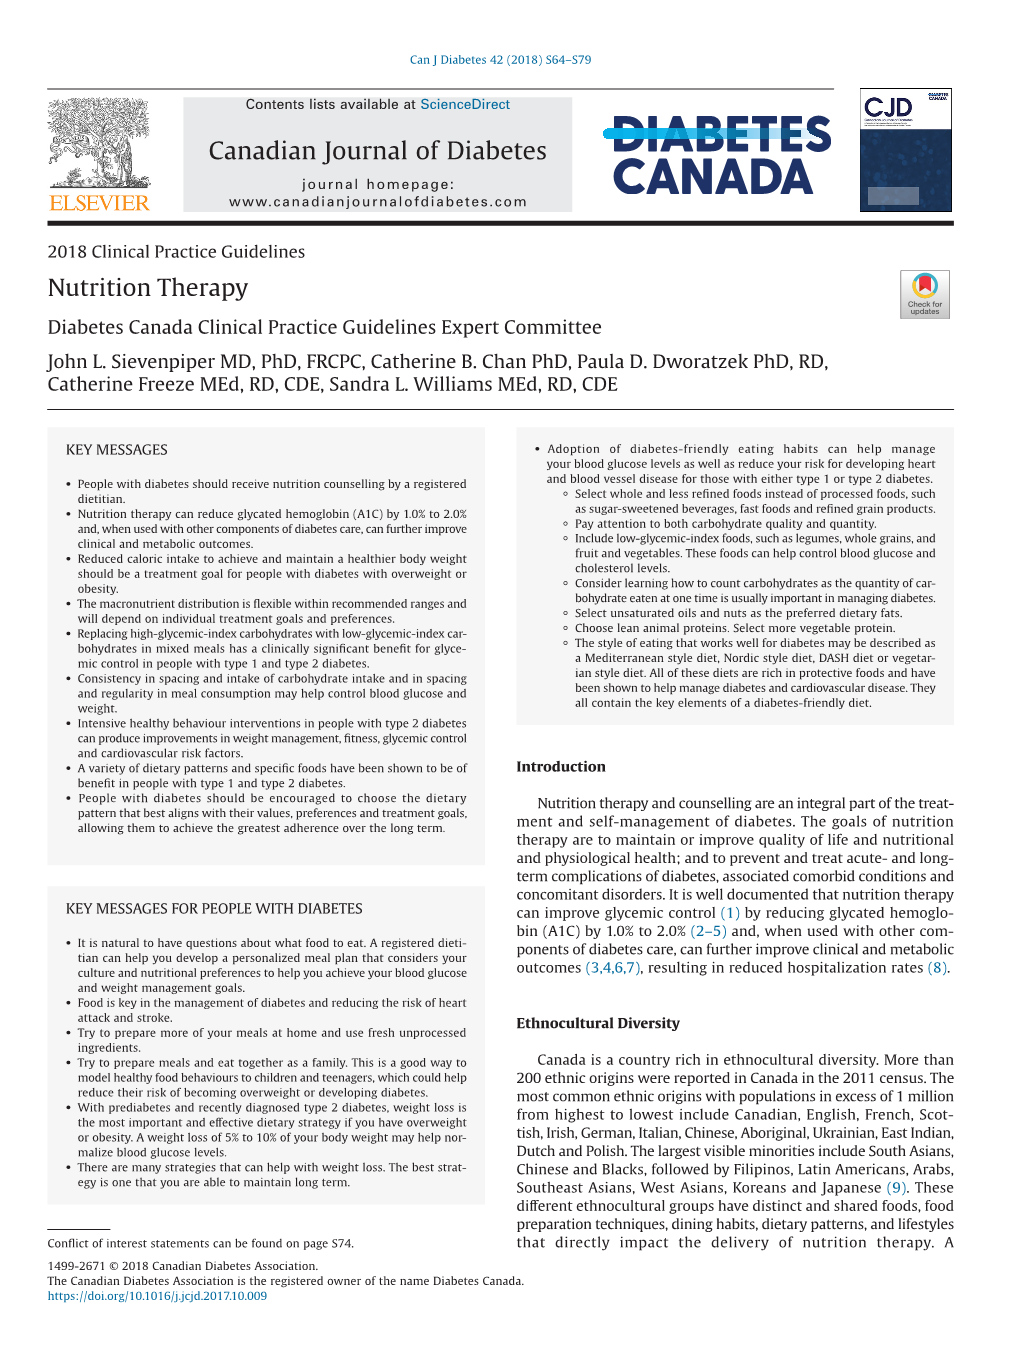 Nutrition Therapy Canadian Journal of Diabetes